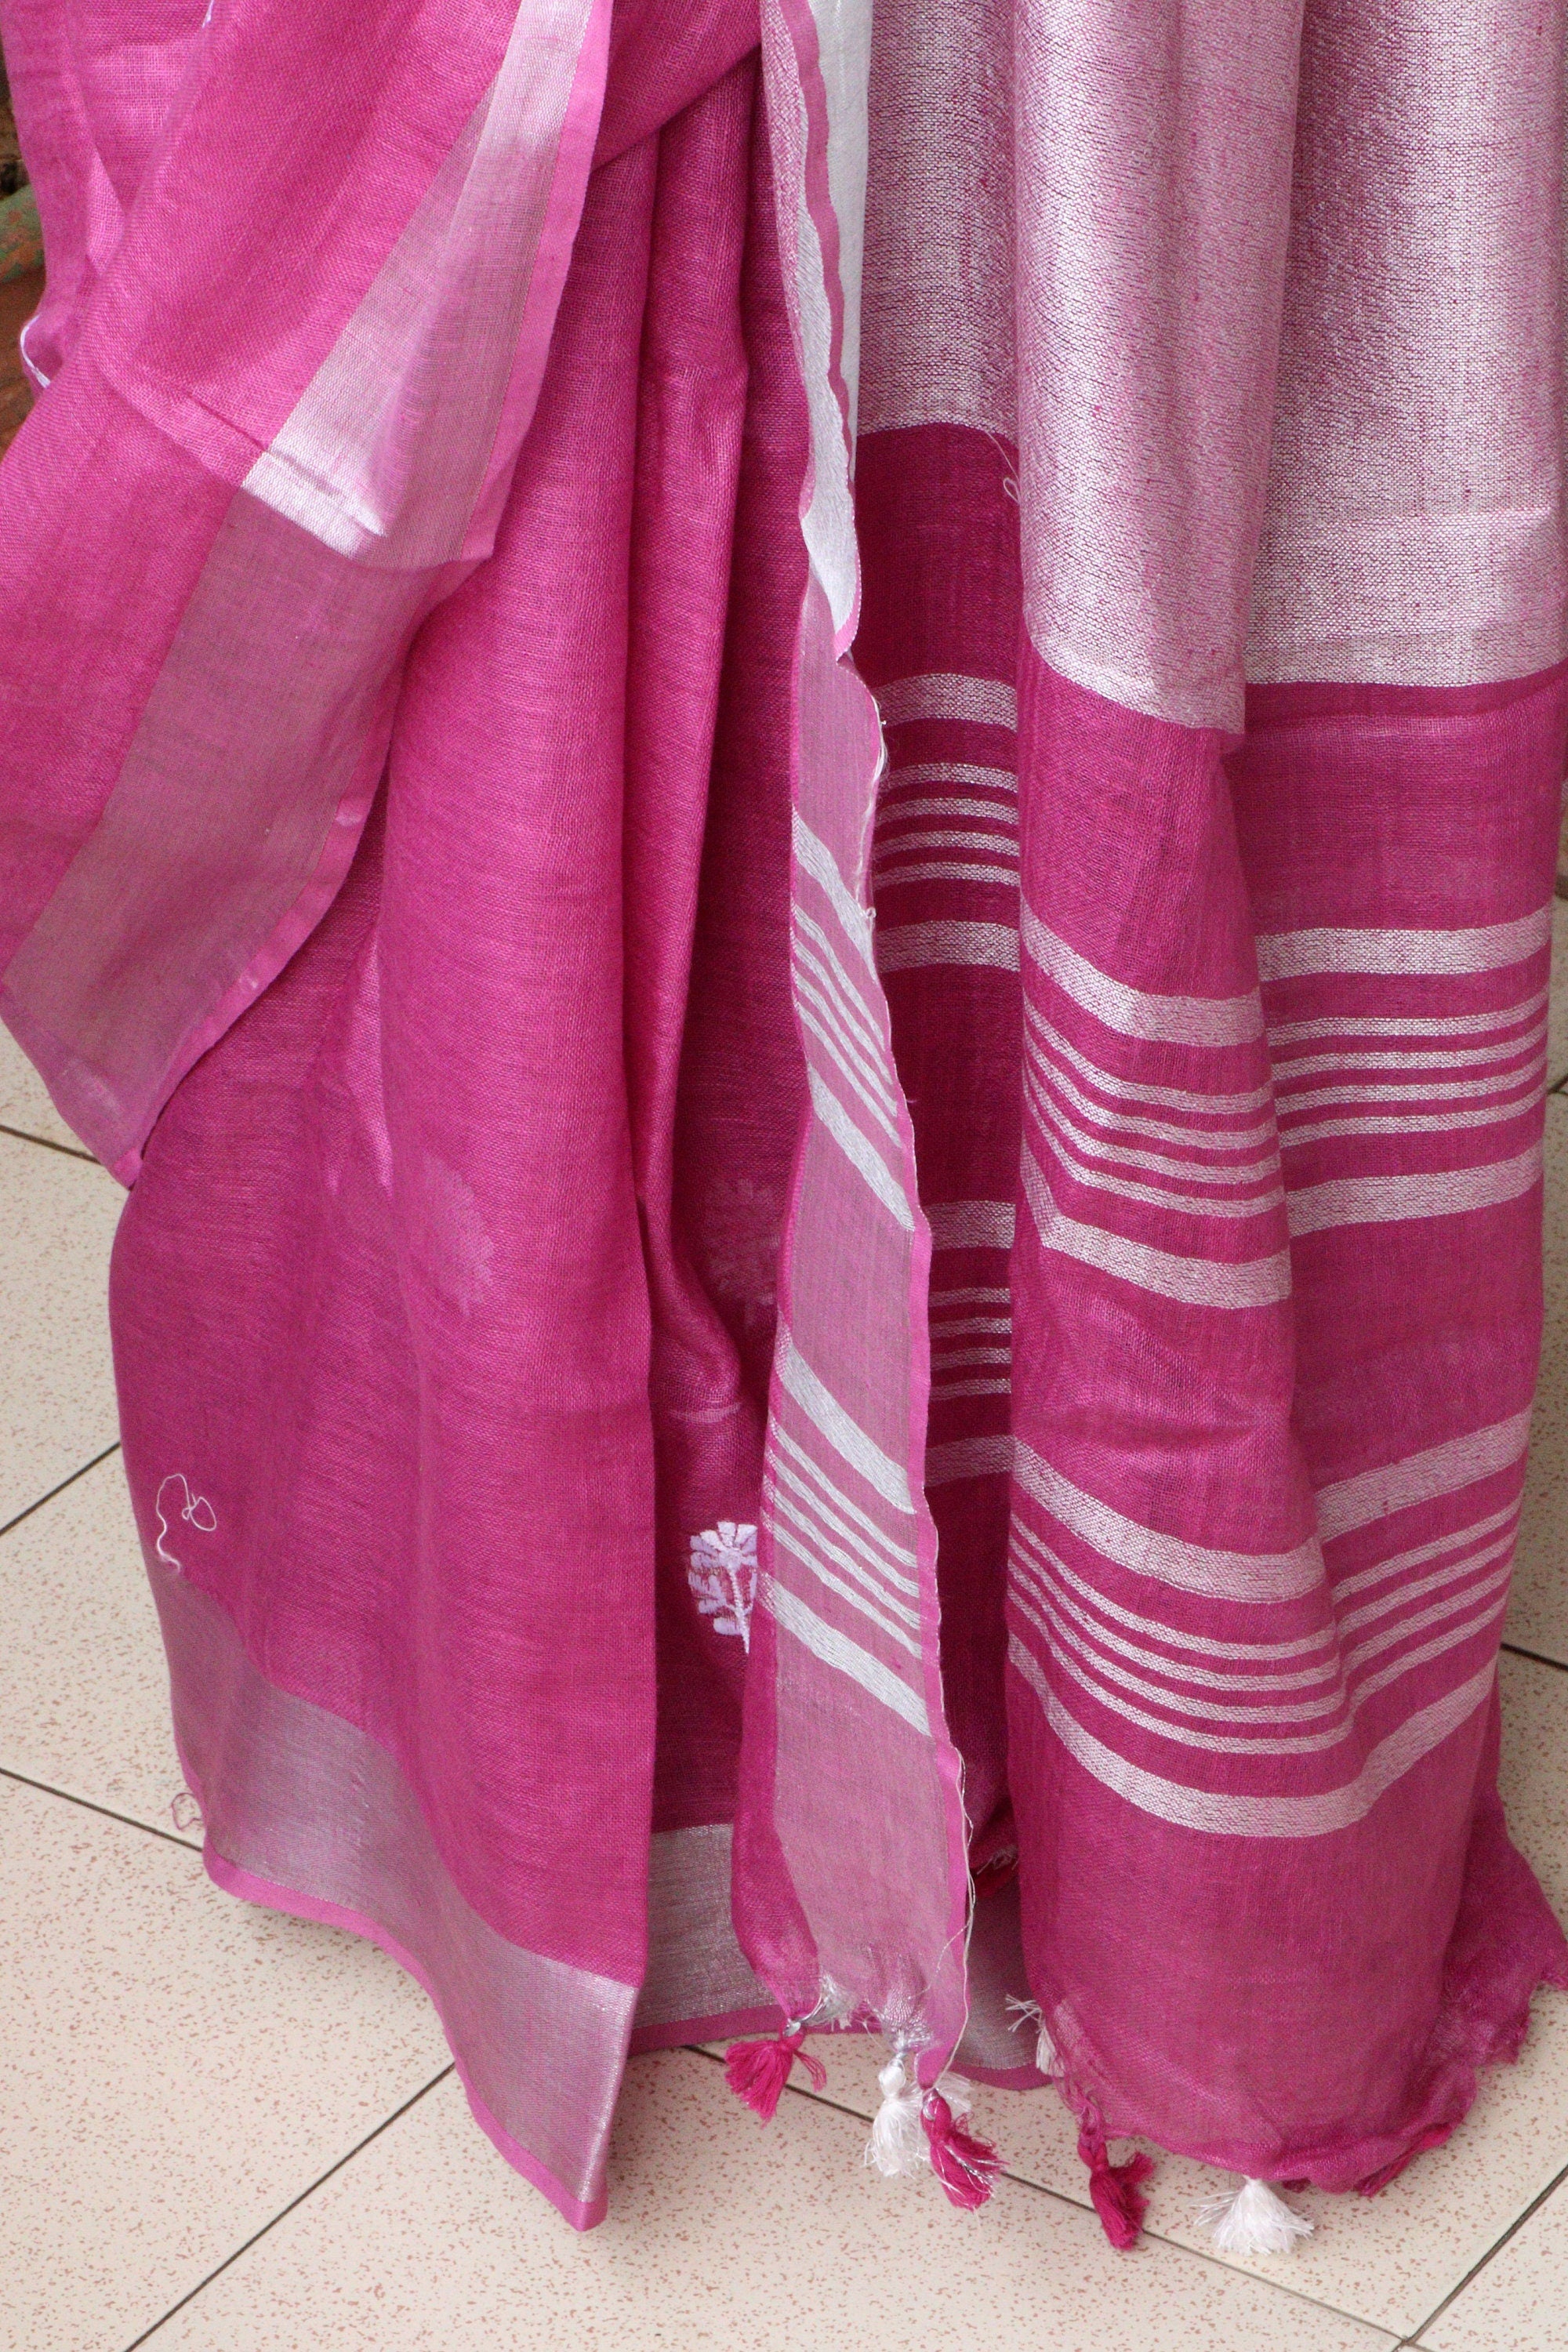 Saree - Handwoven Linen with Embroidered Floral Patterns Through out The Saree Length - Onion Pink - Indian Sari/Indian Dress/Fabric Yard